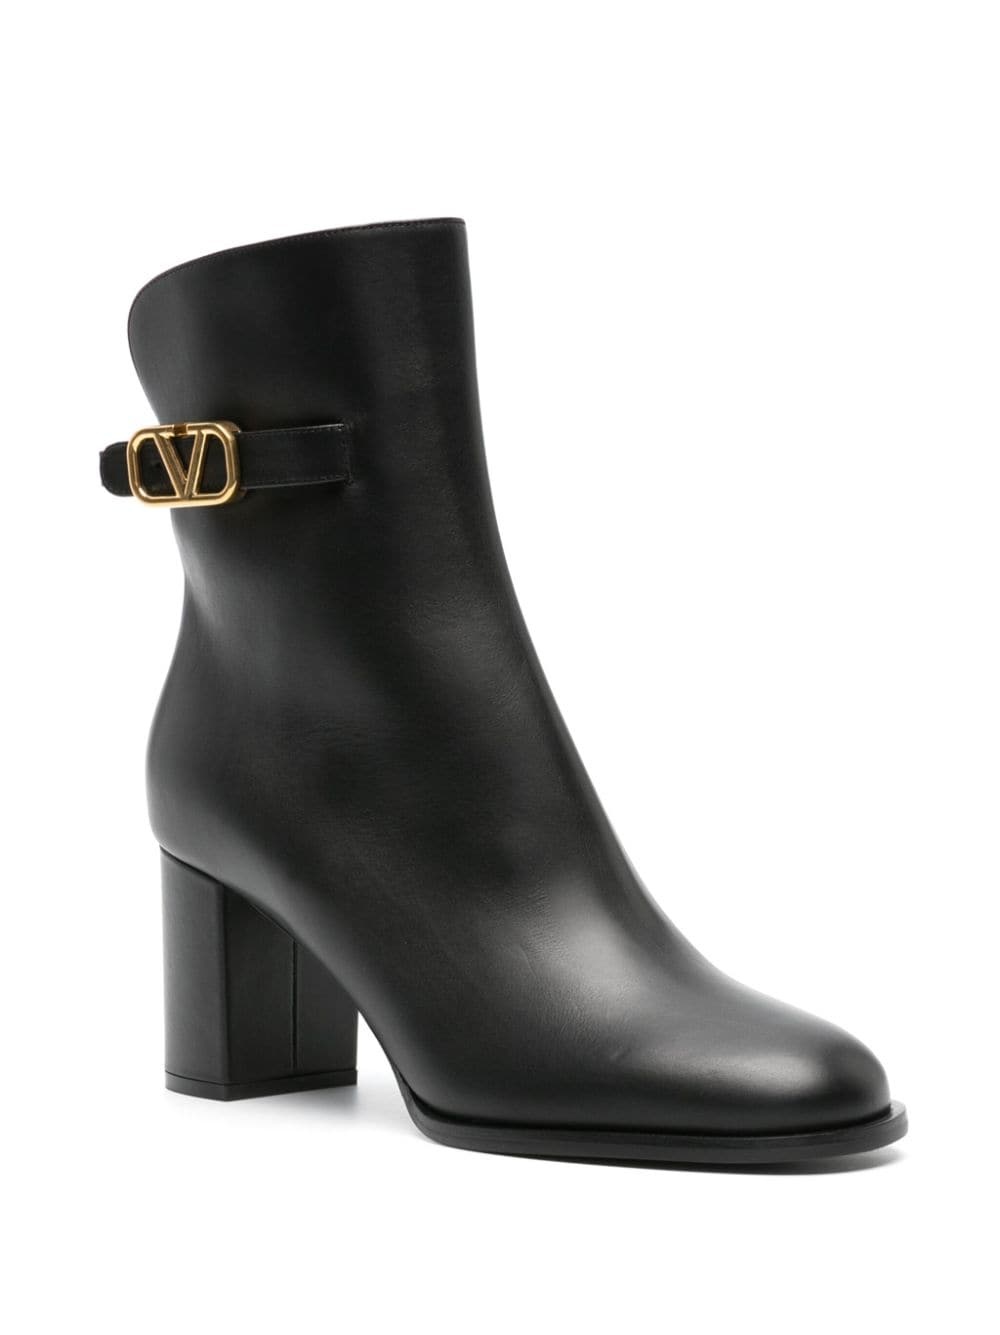 VLogo Signature 70mm leather boots - 2